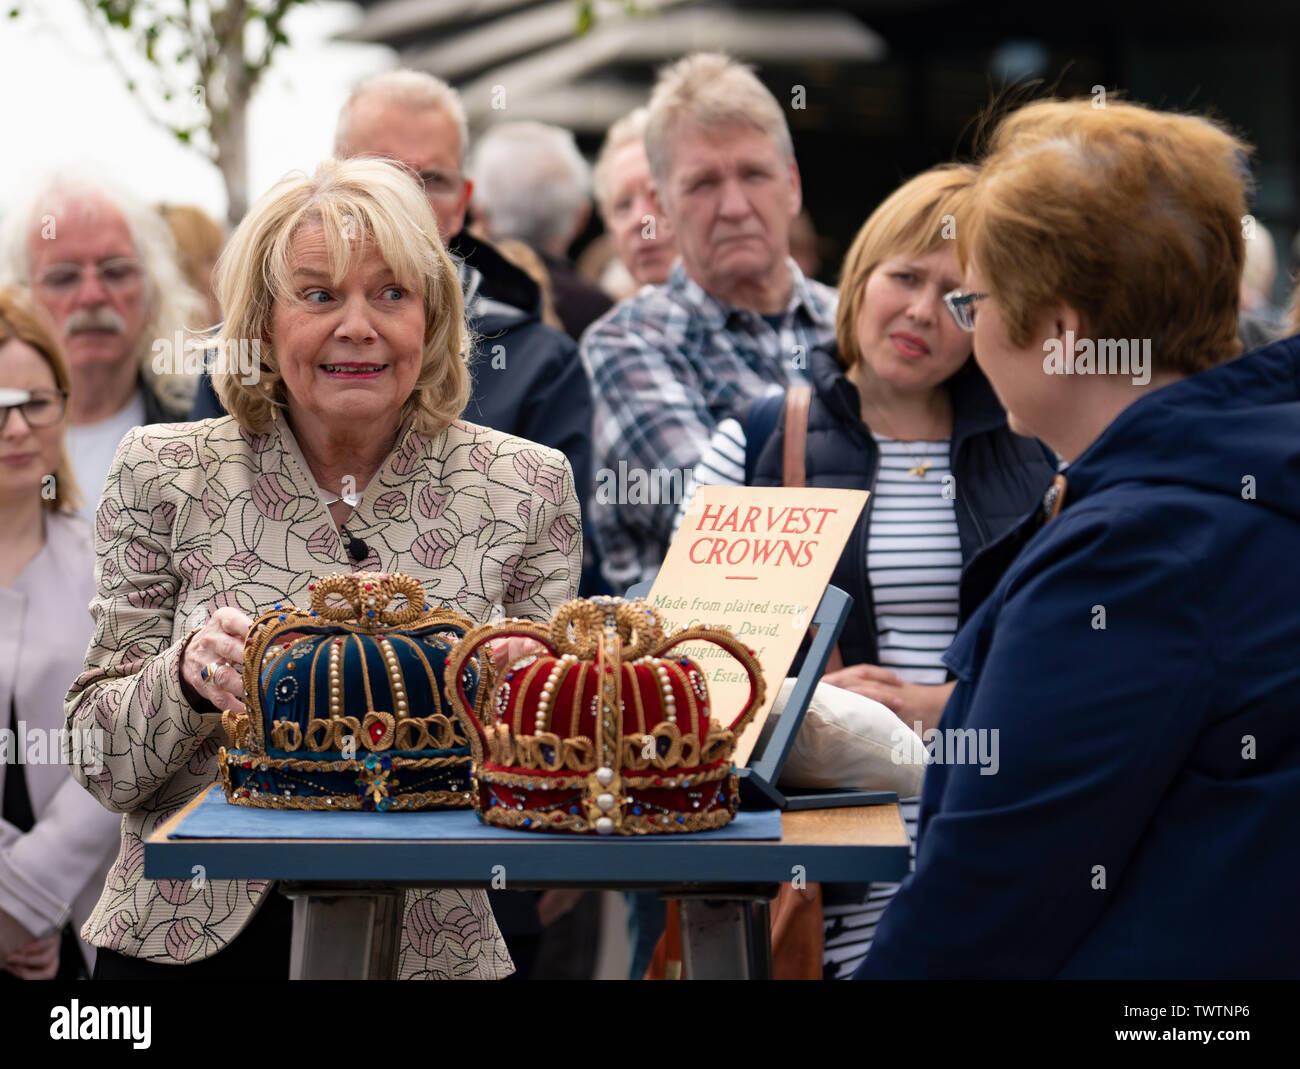 Dundee, Scotland, UK. 23 June 2019. The BBC Antiques Roadshow TV programme is aiming on location t the new V&A Museum in Dundee today. Long queues formed as members of the public arrived with their collectables to have them appraised and valued by the Antiques Roadshow experts. Select items and their owners were chosen to be filmed for the show. Pictured, Judith Miller discusses merits of antiques brought by member of the public Credit: Iain Masterton/Alamy Live News Stock Photo